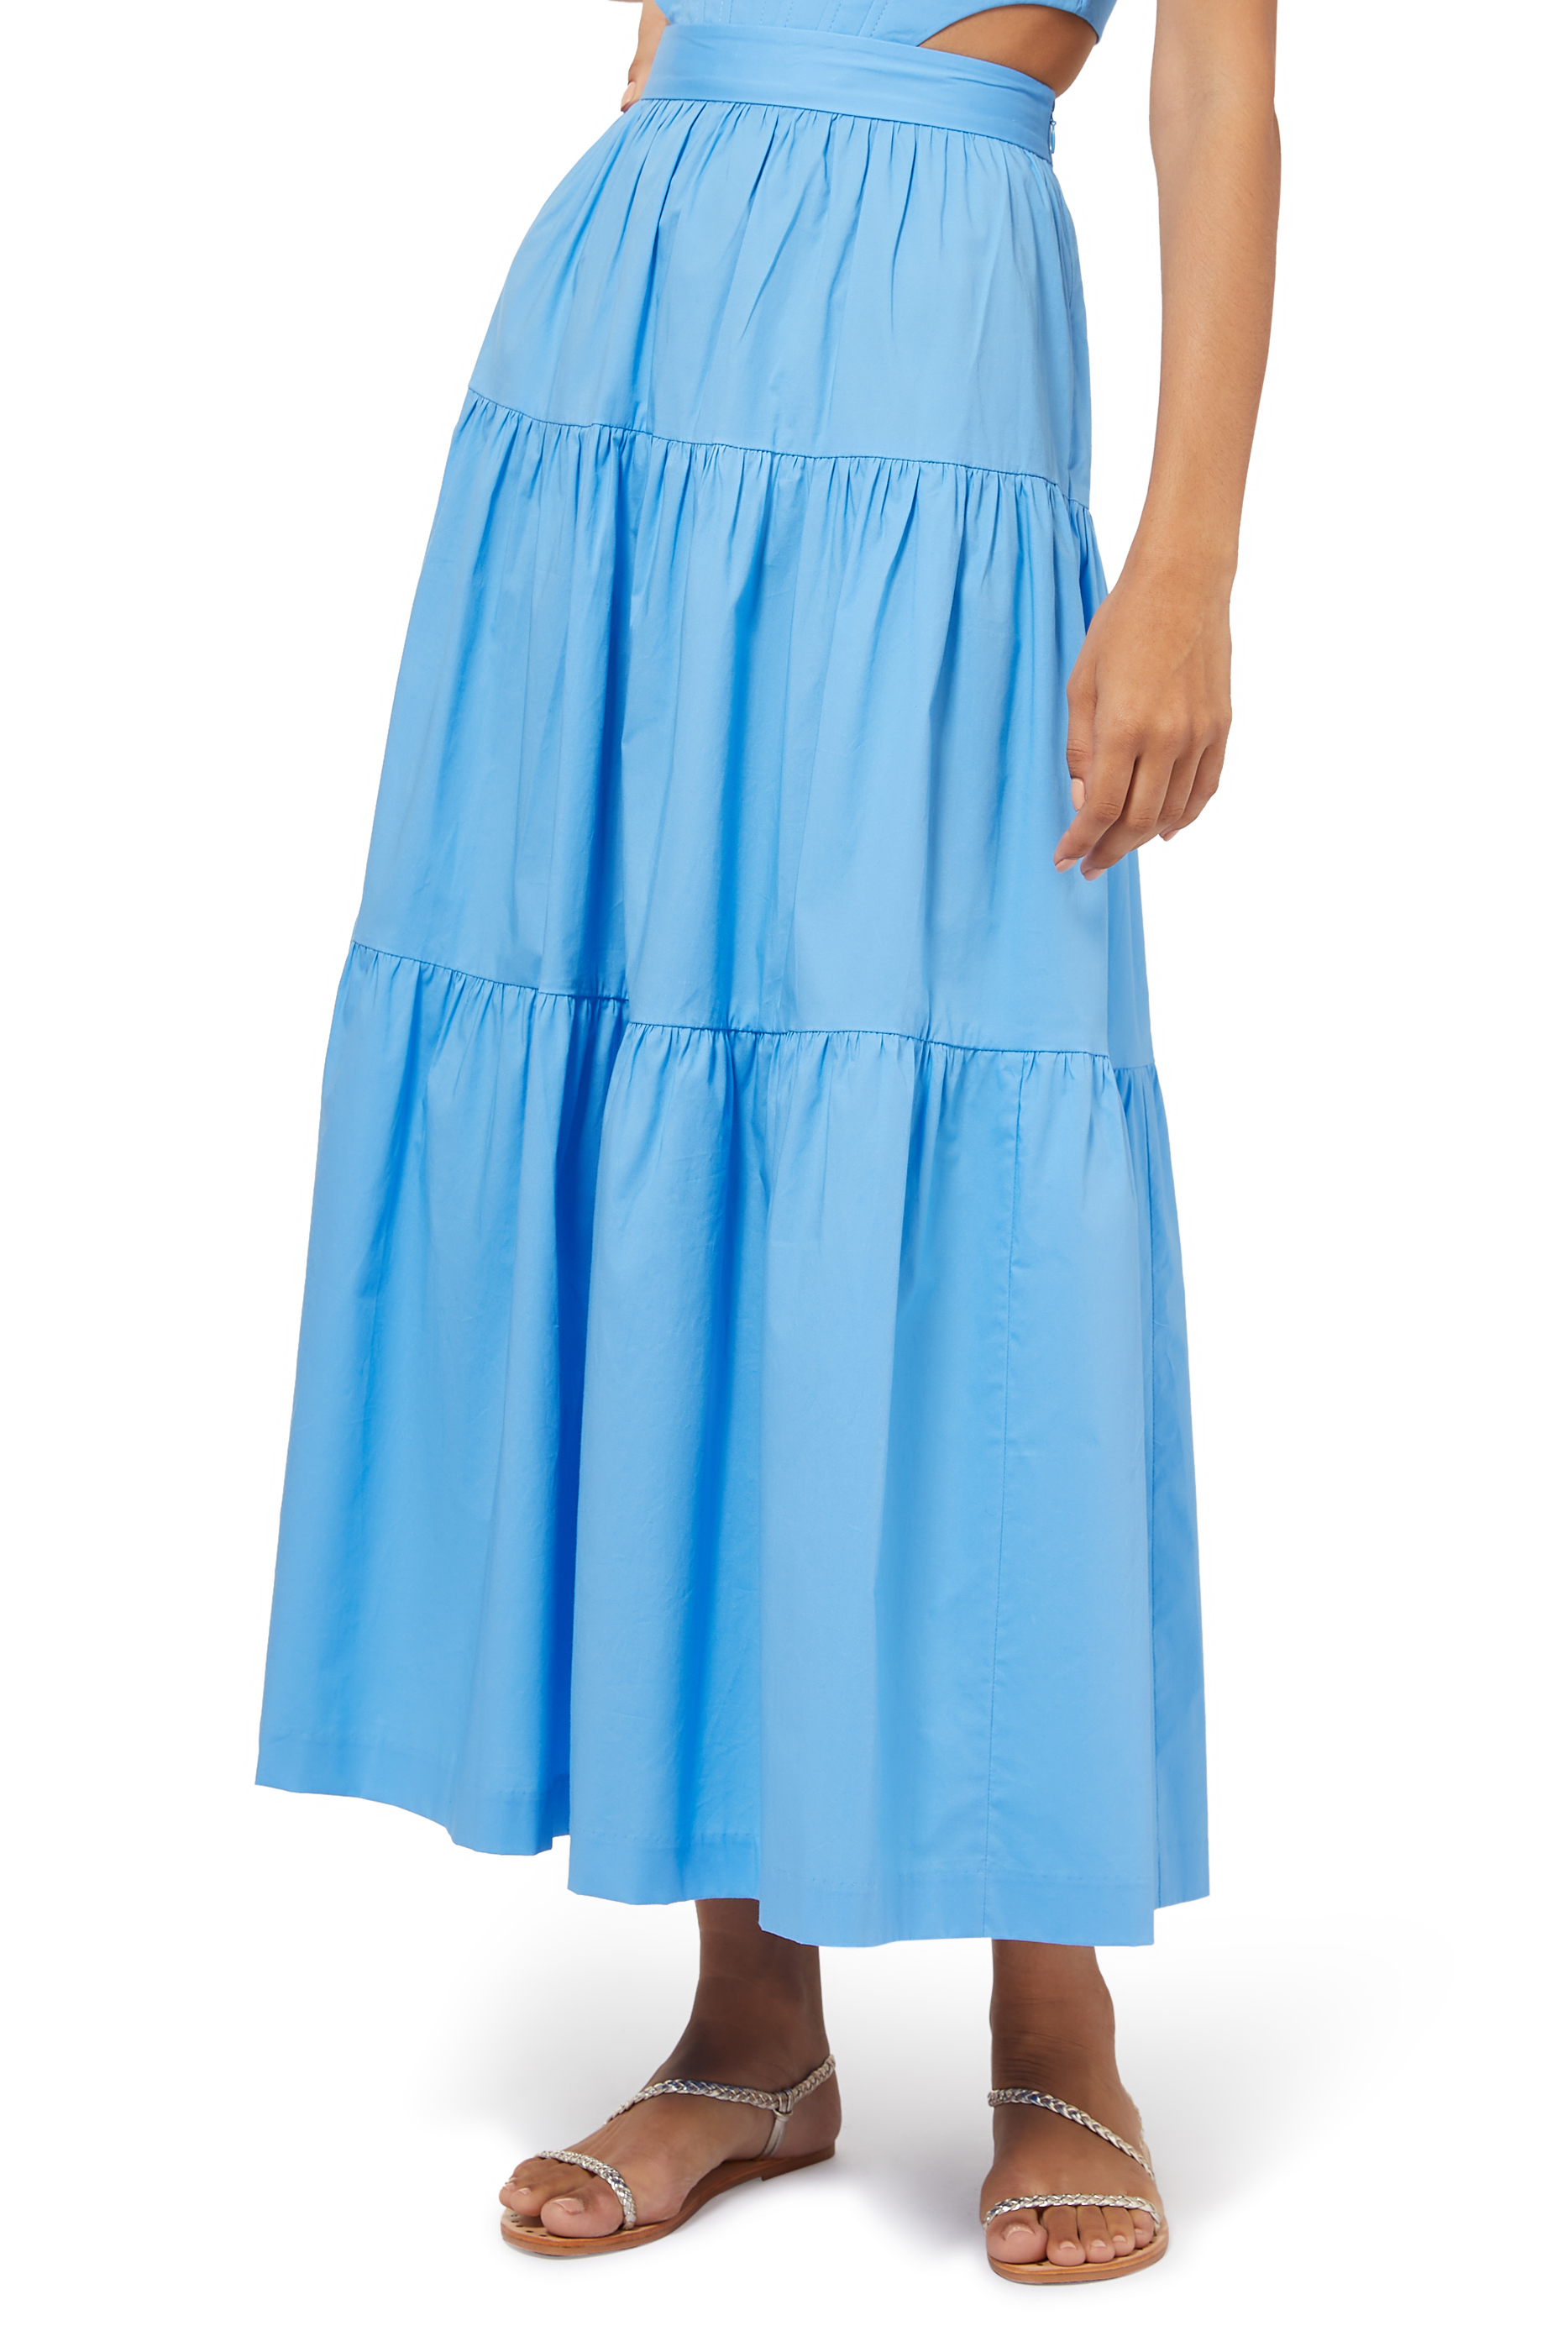 Buy Staud Tiered Sea Skirt - Womens for AED 950.00 Skirts ...